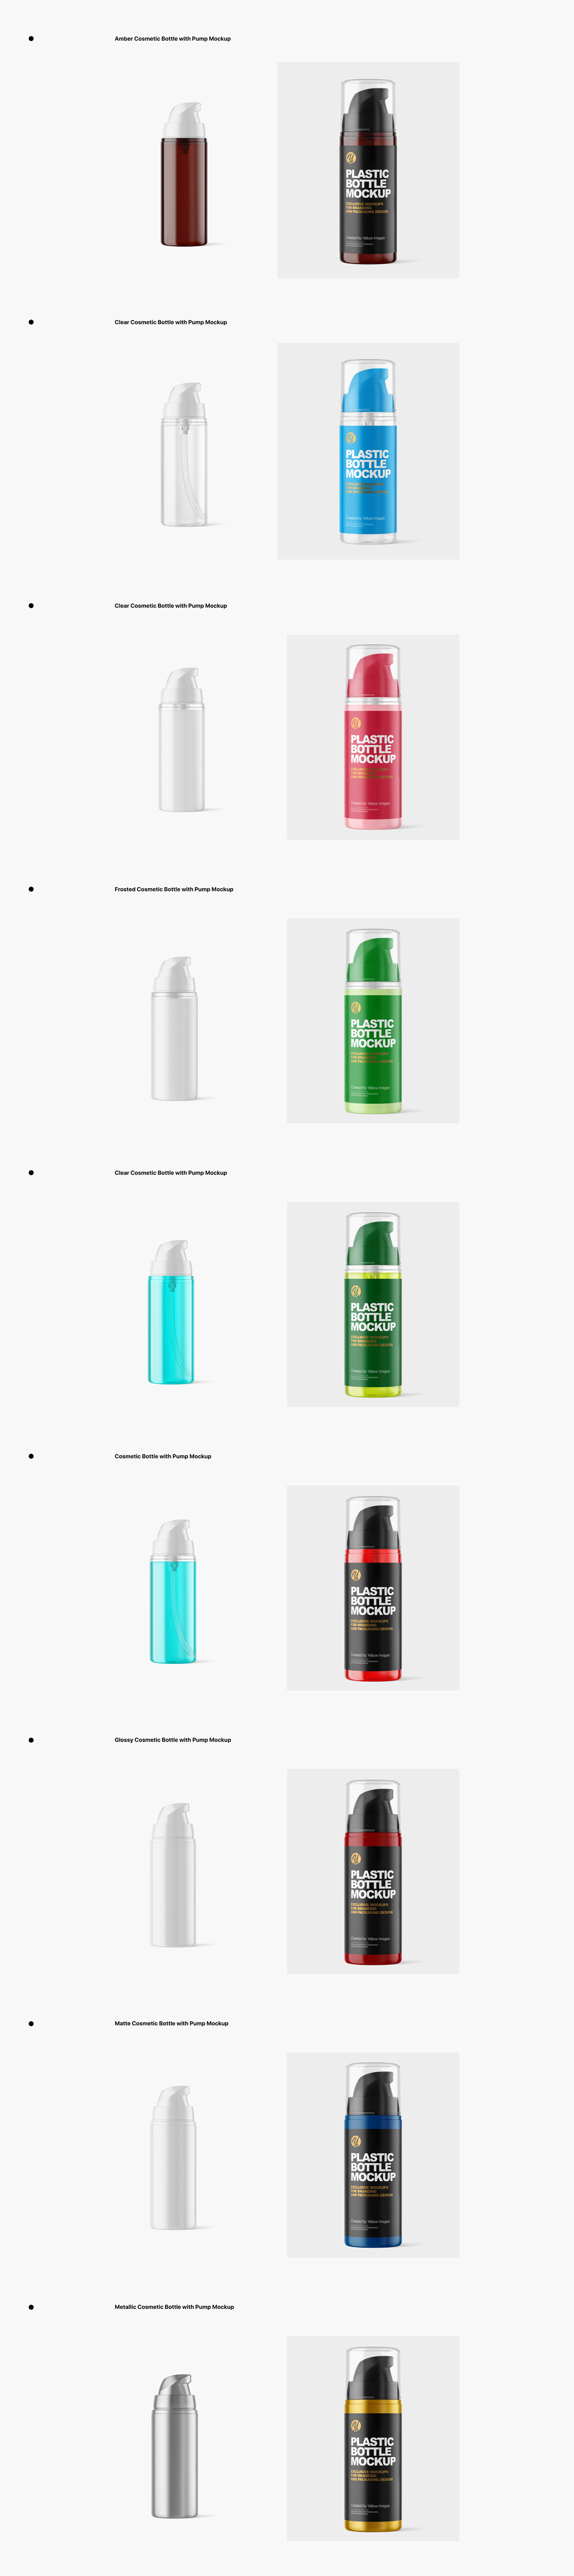 Download Plastic Bottles With Pump Mpckups Psd On Student Show Yellowimages Mockups